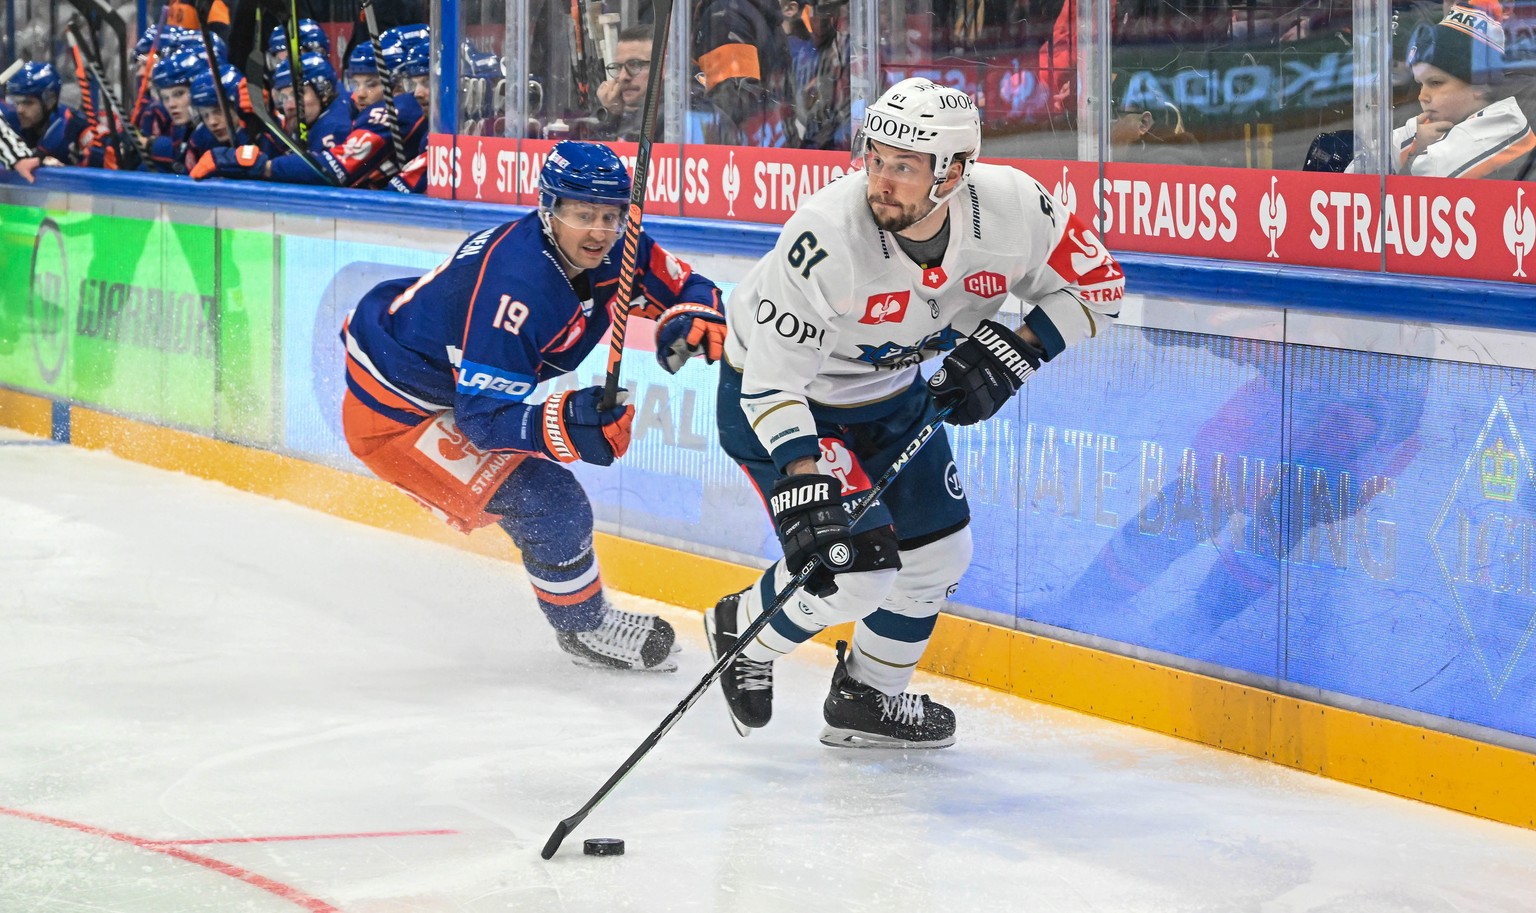 epa10398396 Sven Leuenberger (R) of Zug and Veli-Matti Savinainen (L) of Tappara in action during the Champions Hockey League Semi-Final first leg match between Tappara Tampere of Finland and Ev Zug o ...